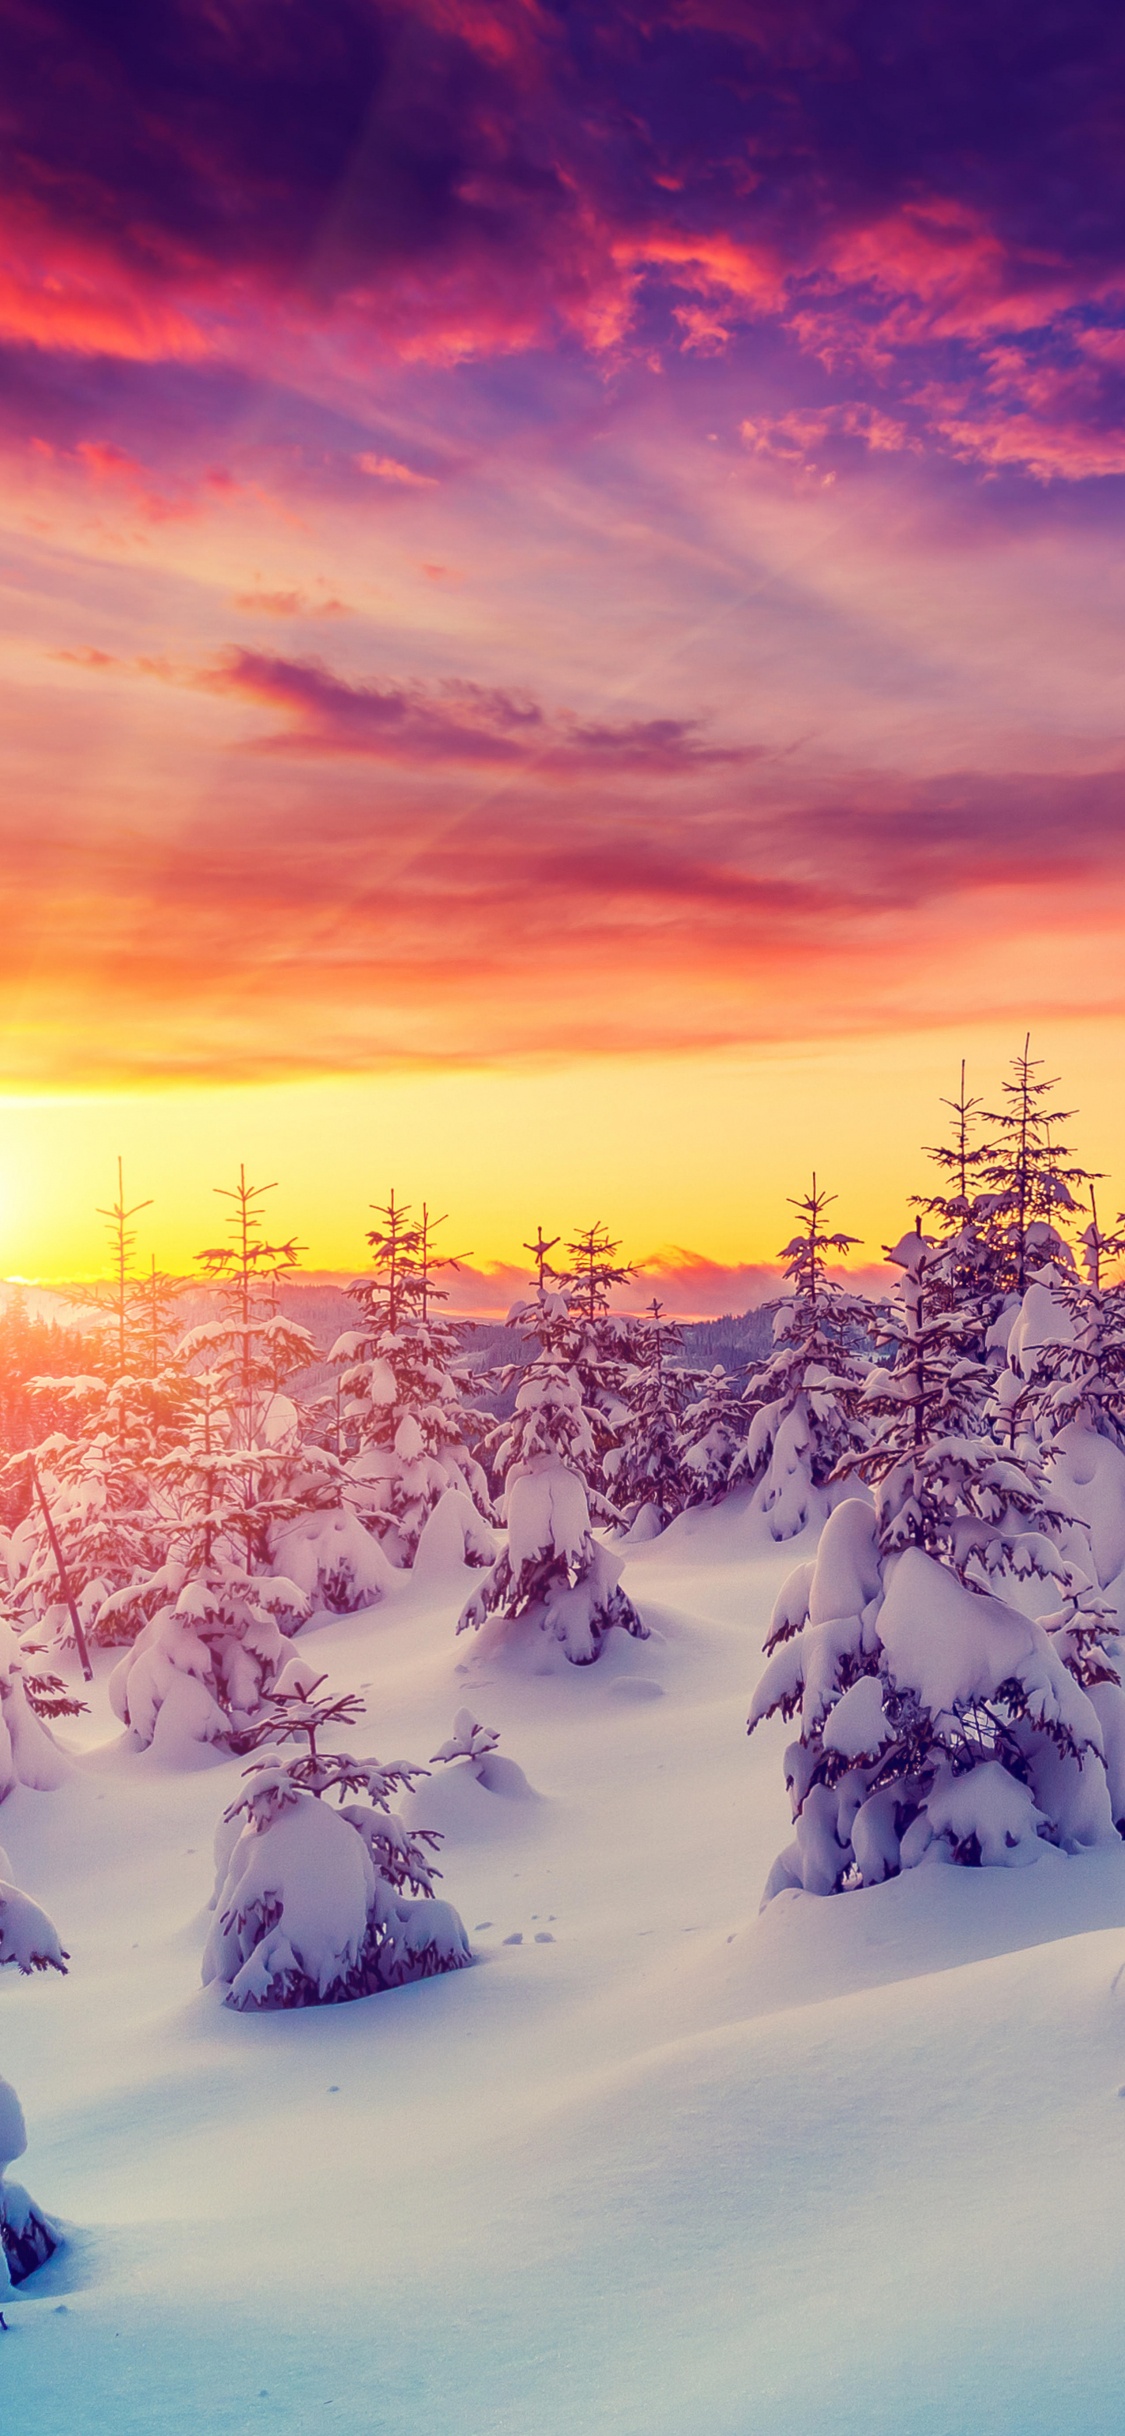 Snow Covered Trees During Sunset. Wallpaper in 1125x2436 Resolution